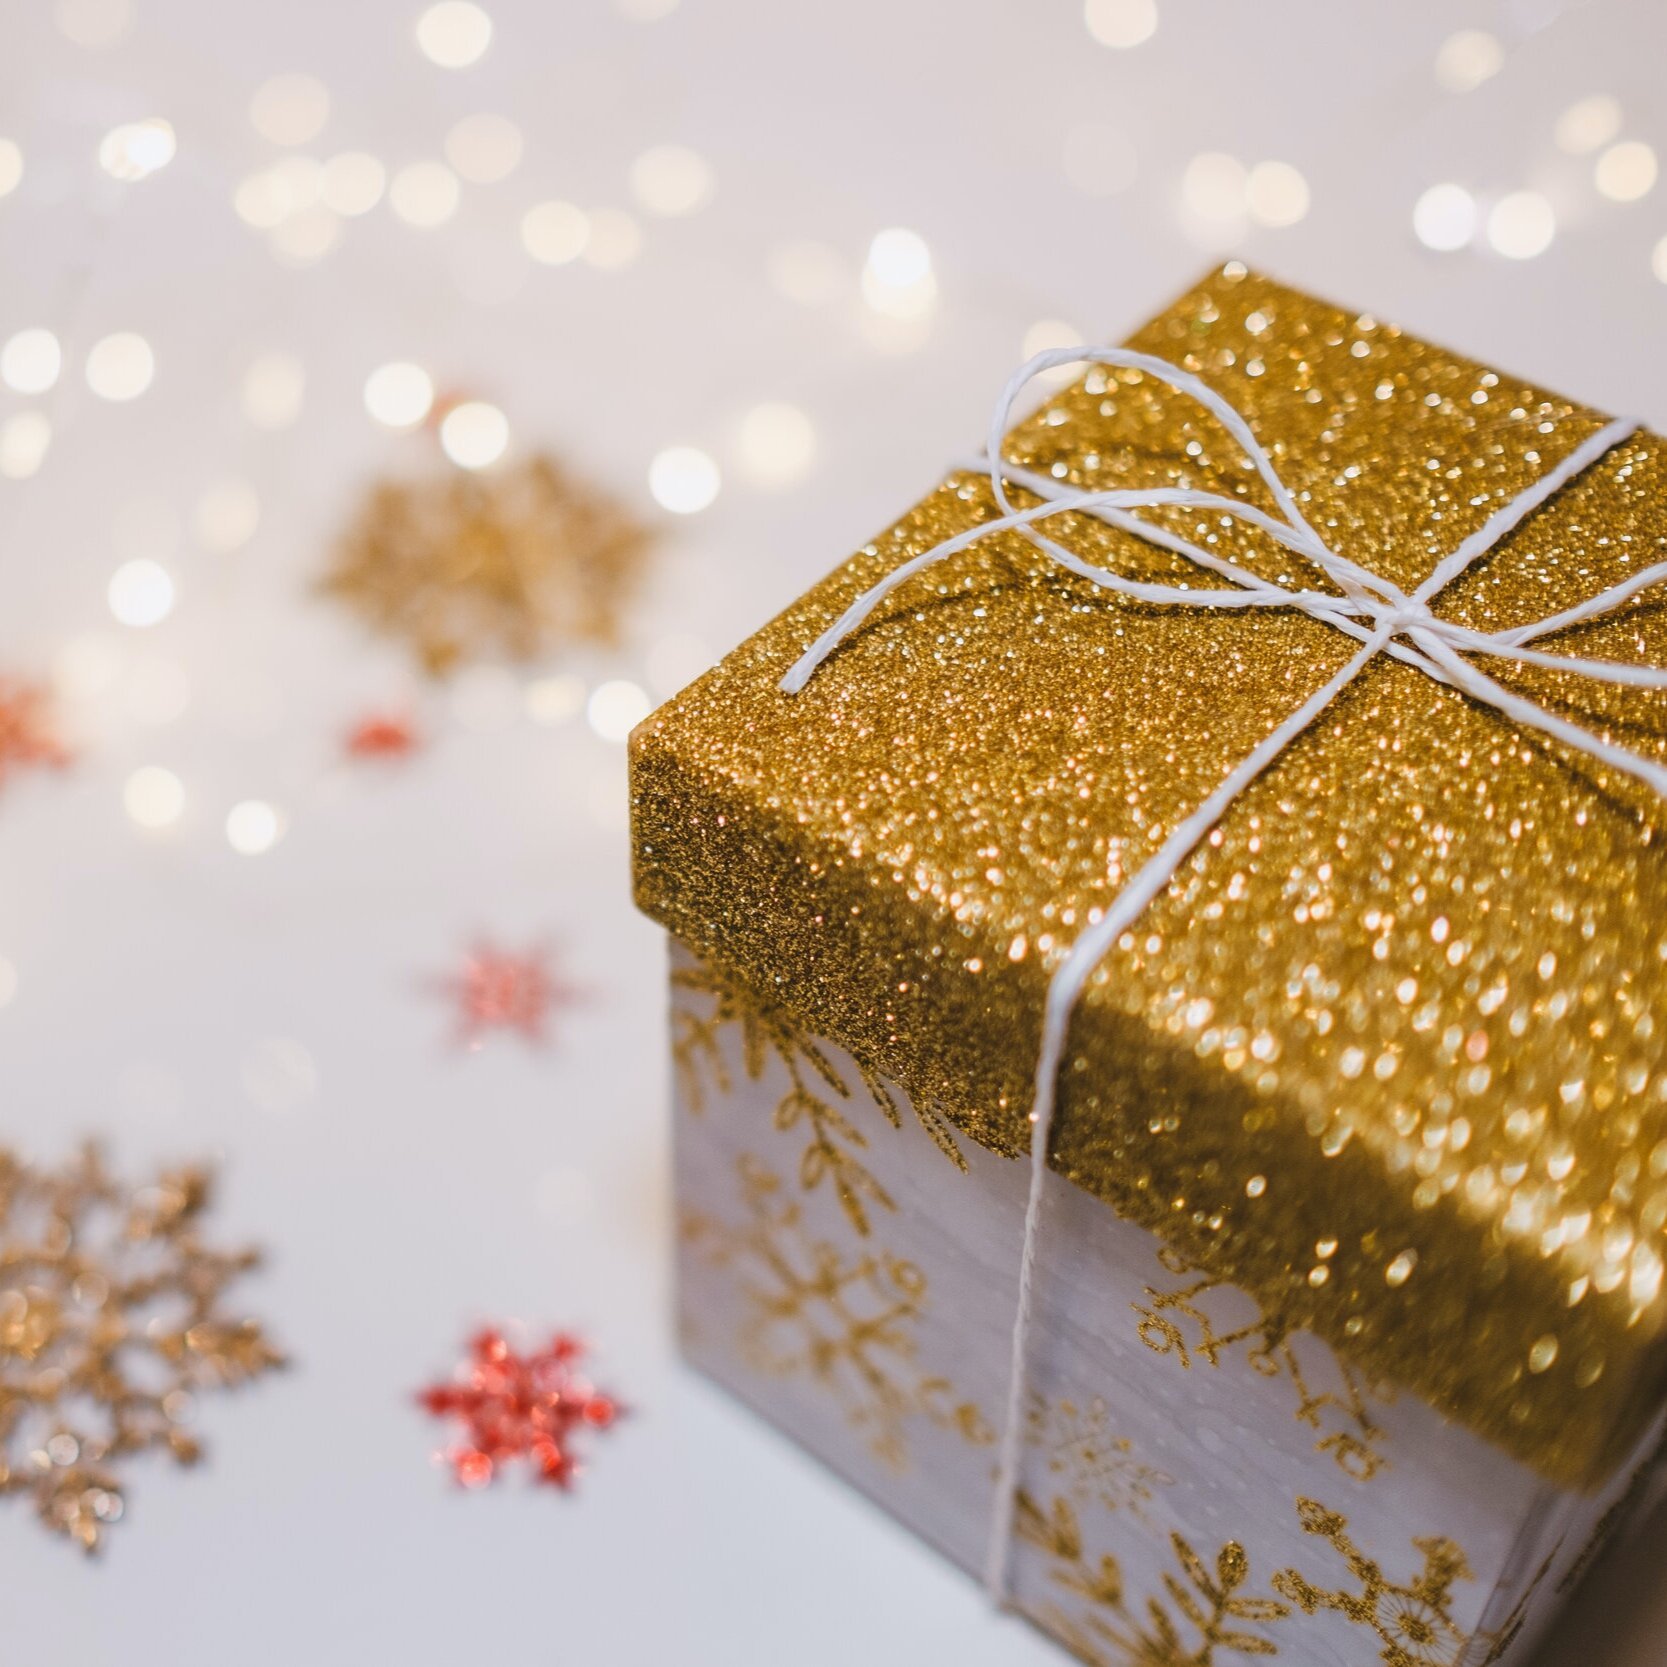 The Ultimate Gift Giving Guide for the Mindfulness Meditation Guru